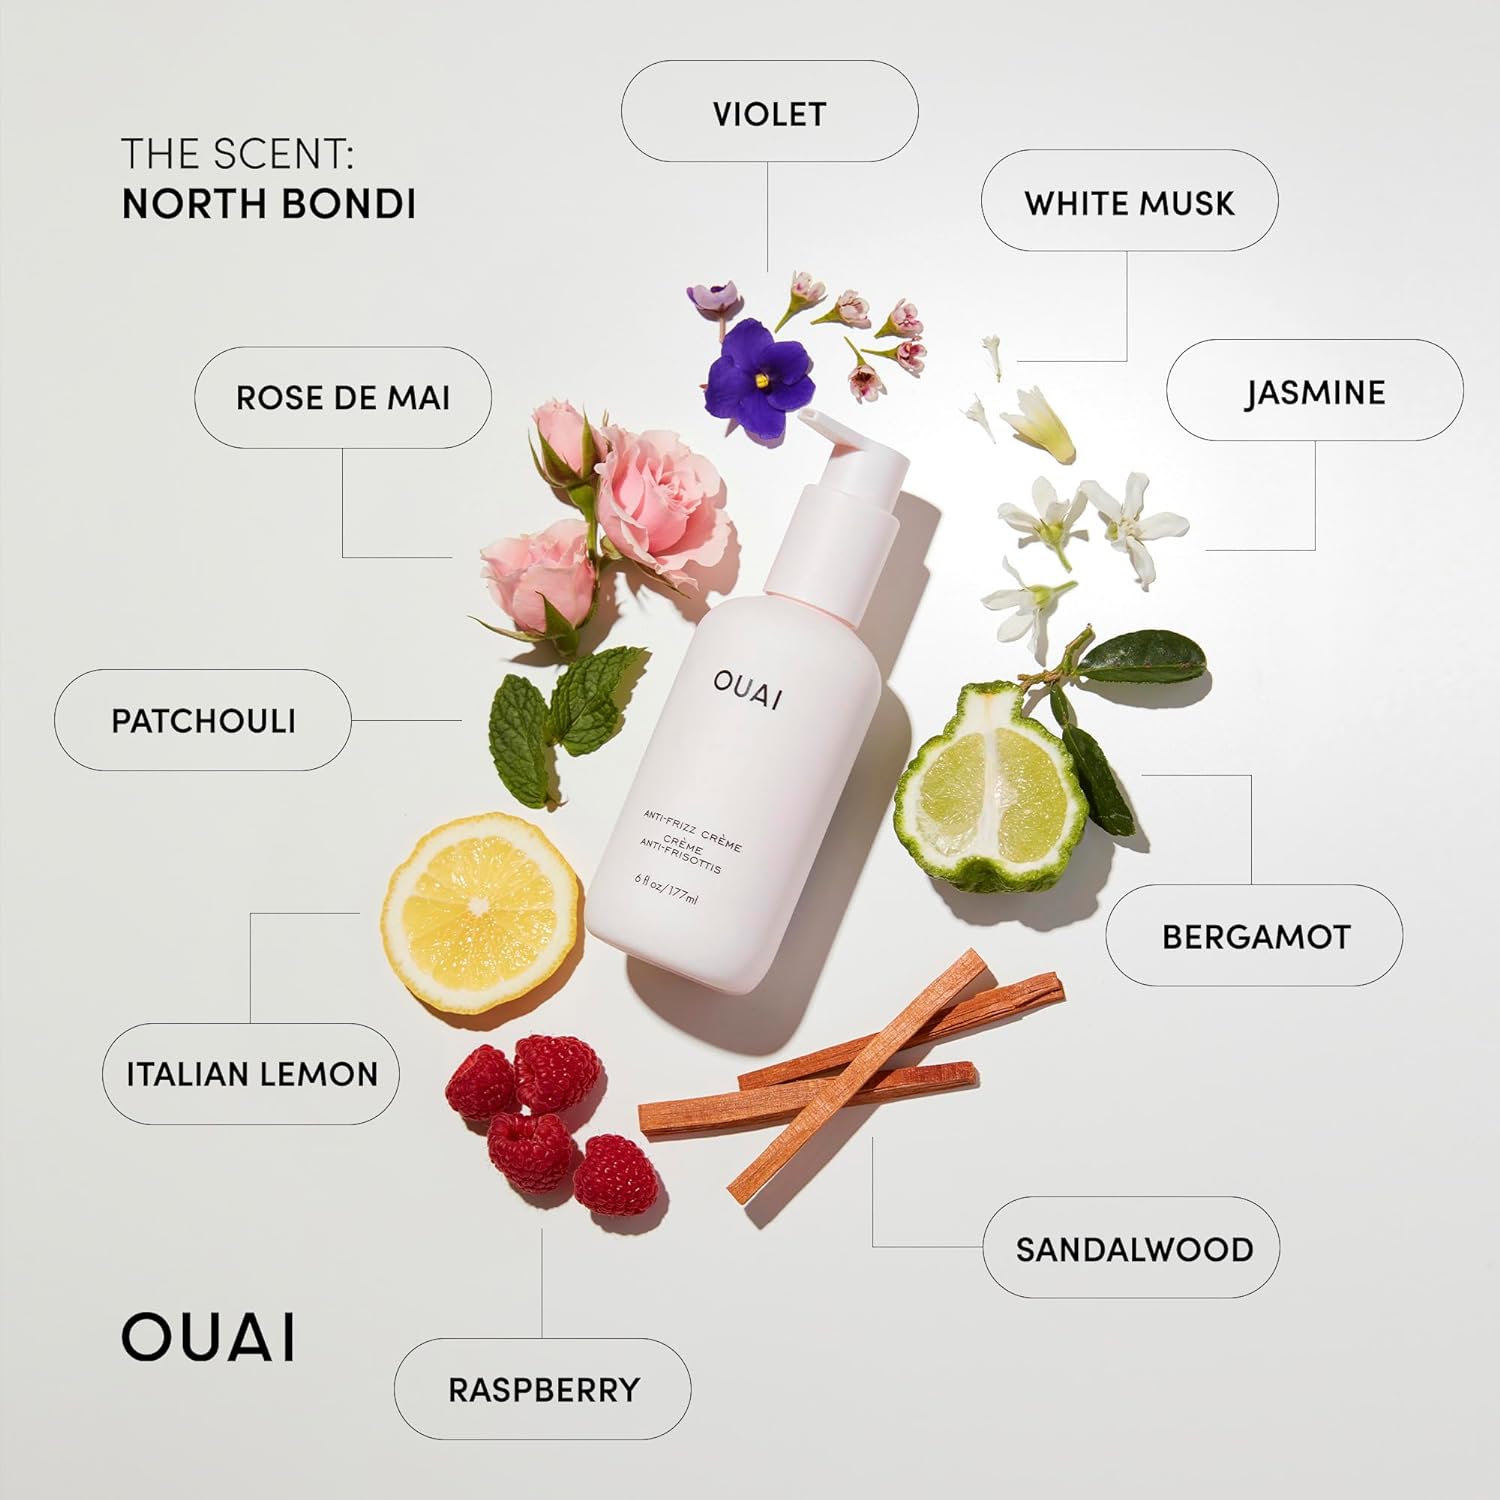 OUAI Anti Frizz Cream Travel Duo - Moisturizing Hair Cream with Frizz Control & Heat Protection - Provides Lasting Hydration with Jackfruit & Beetroot - Paraben & Sulfate Free (2 Count, 6 Oz/ 3 Oz) : Beauty & Personal Care